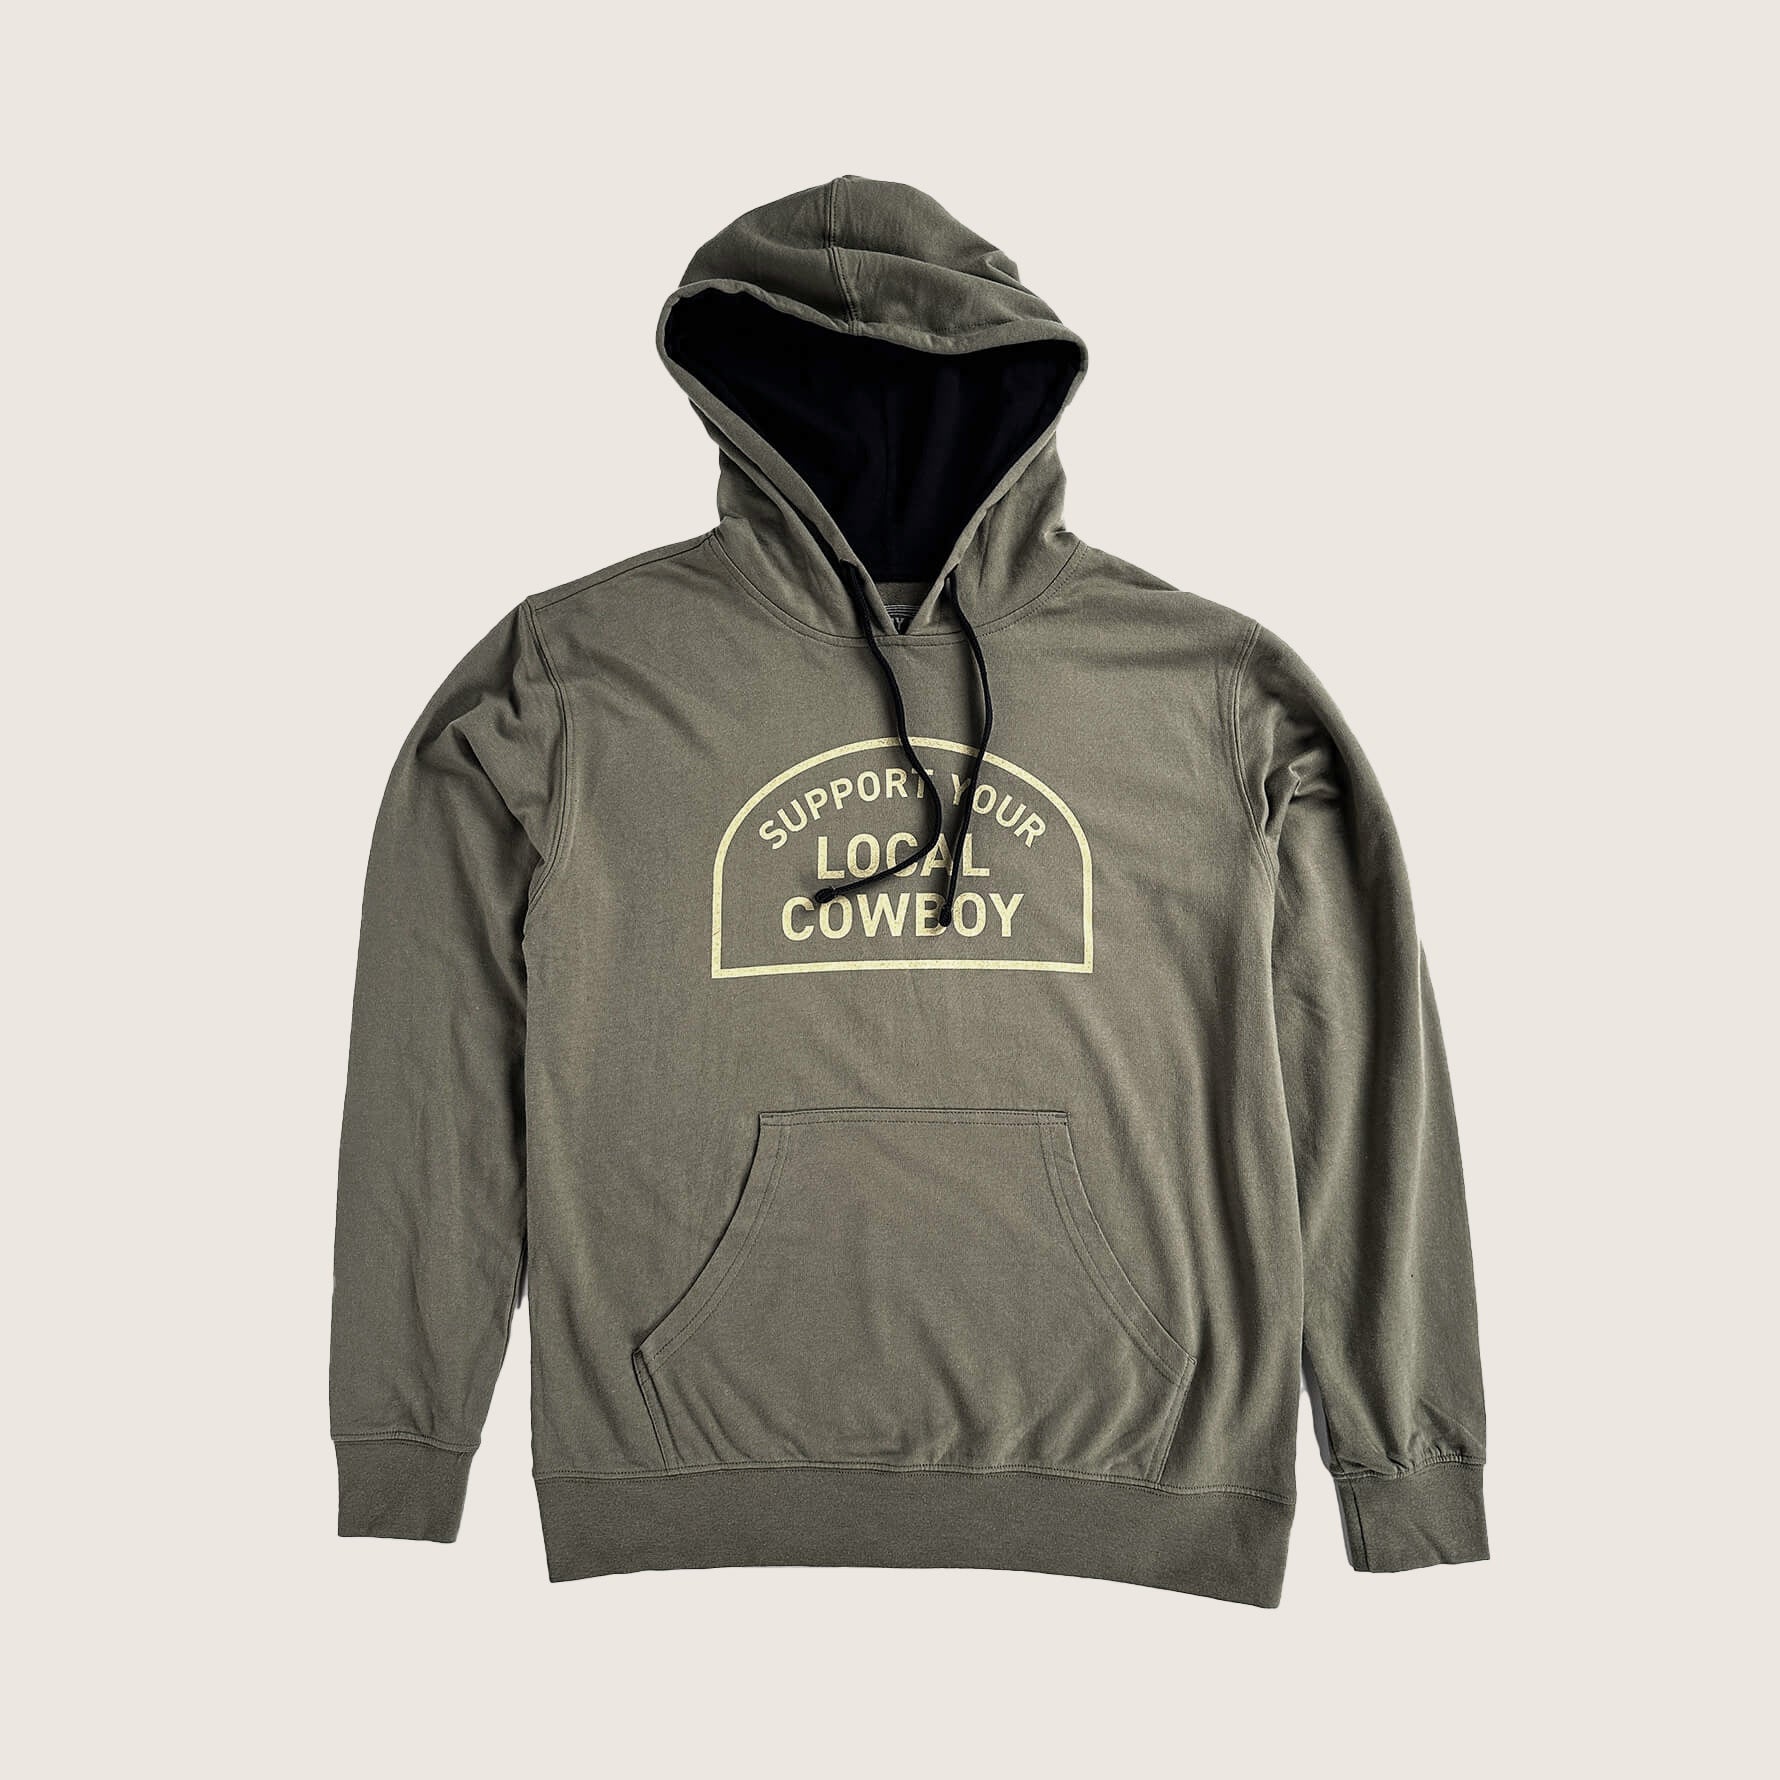 Cowboy Cool Support Your Local Cowboy Hoodie